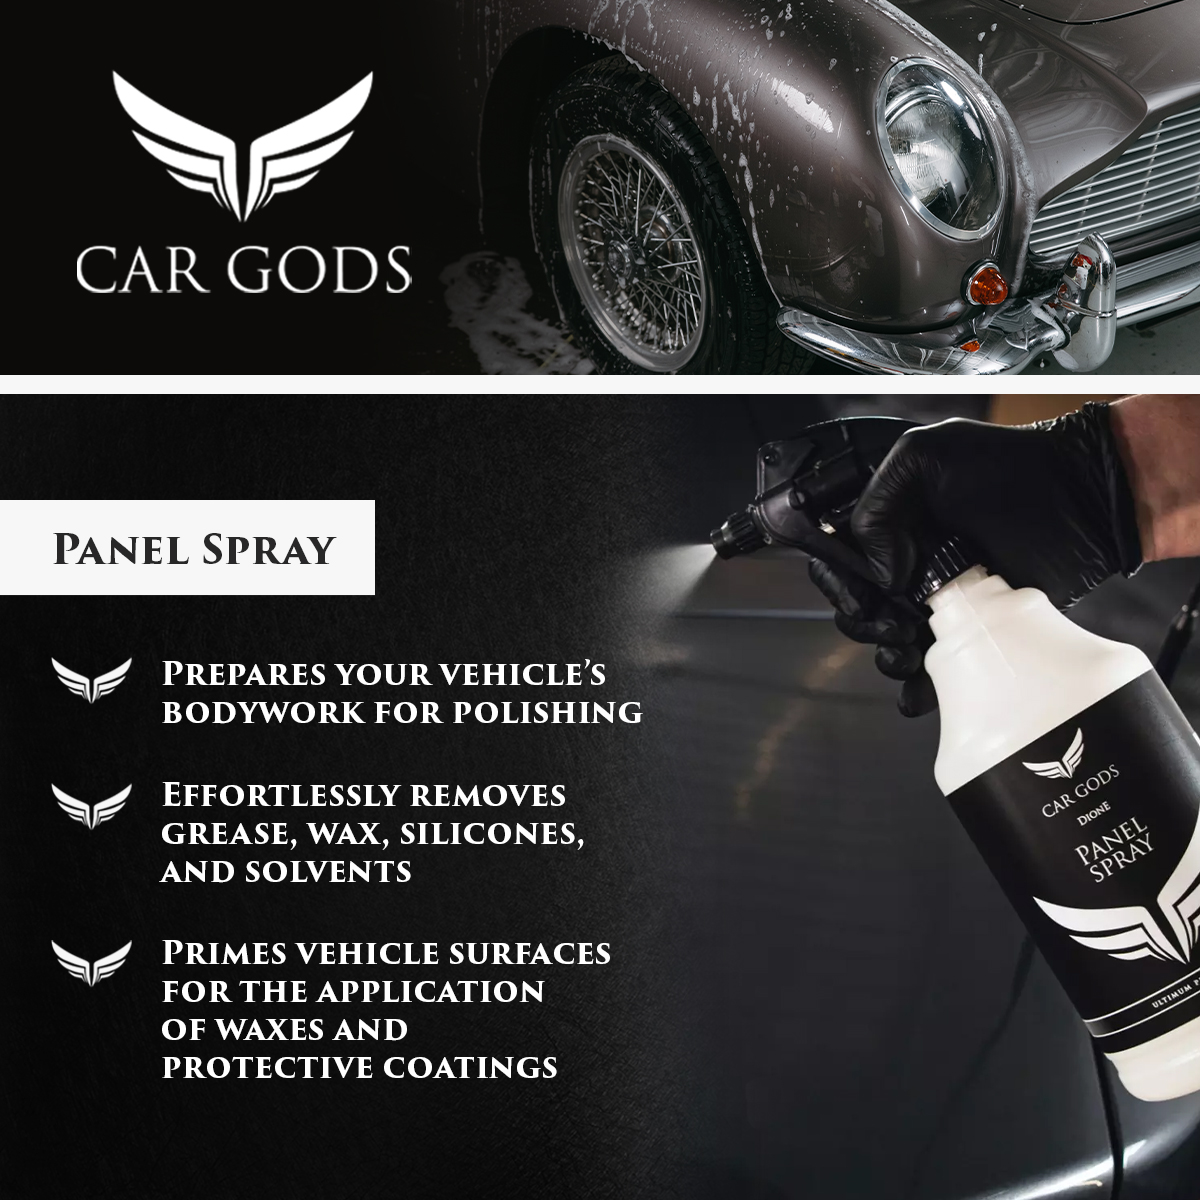 Car Gods Panel Spray. Prepare your car for the next polishing or compound stage by removing grease, wax, silicones, and solvents effortlessly. Plus, prime your vehicle’s surfaces for the application of waxes and protective coatings.